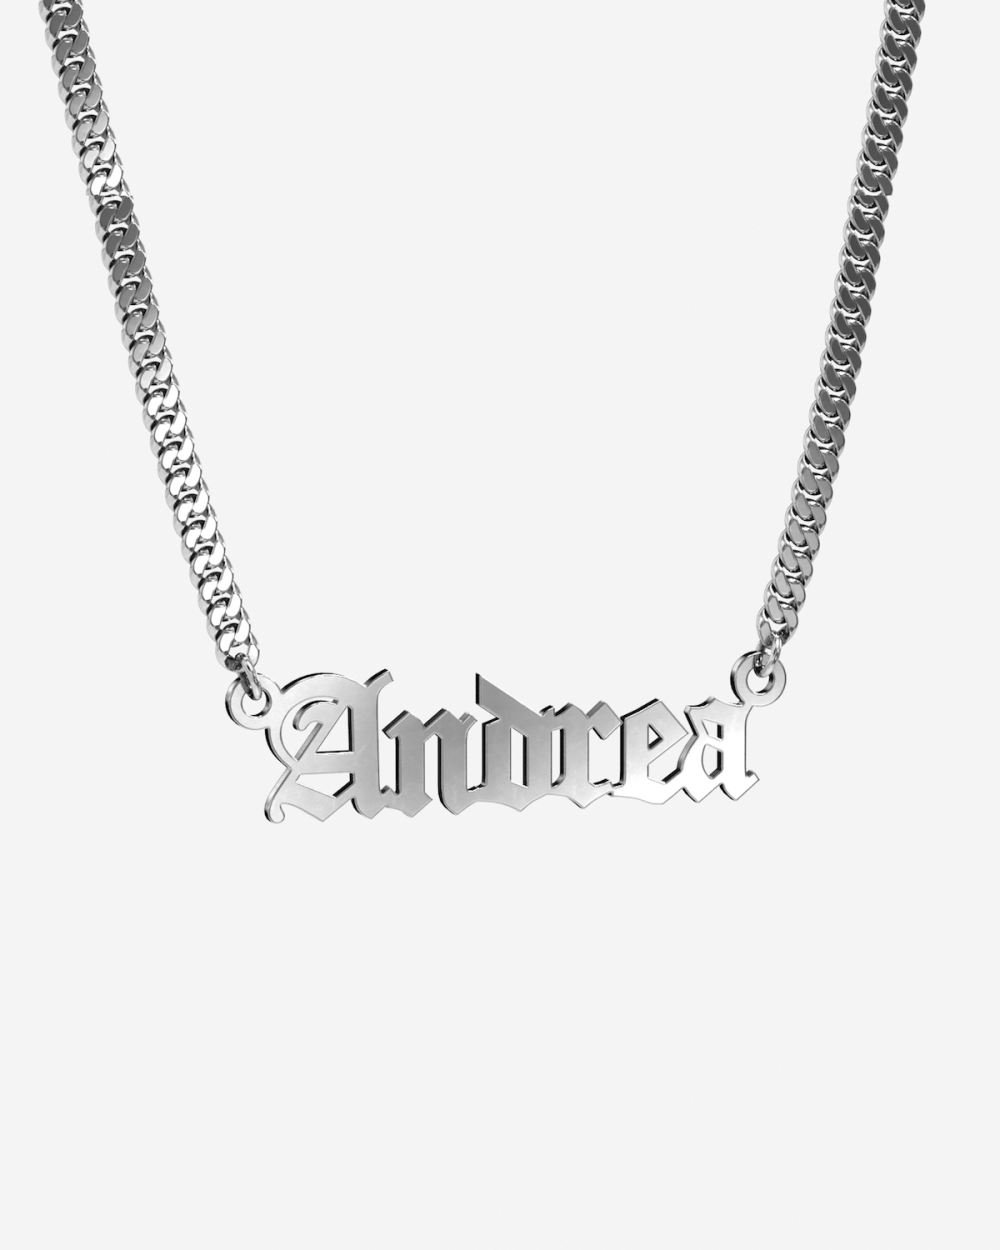 NAME CURB CHAIN NECKLACE